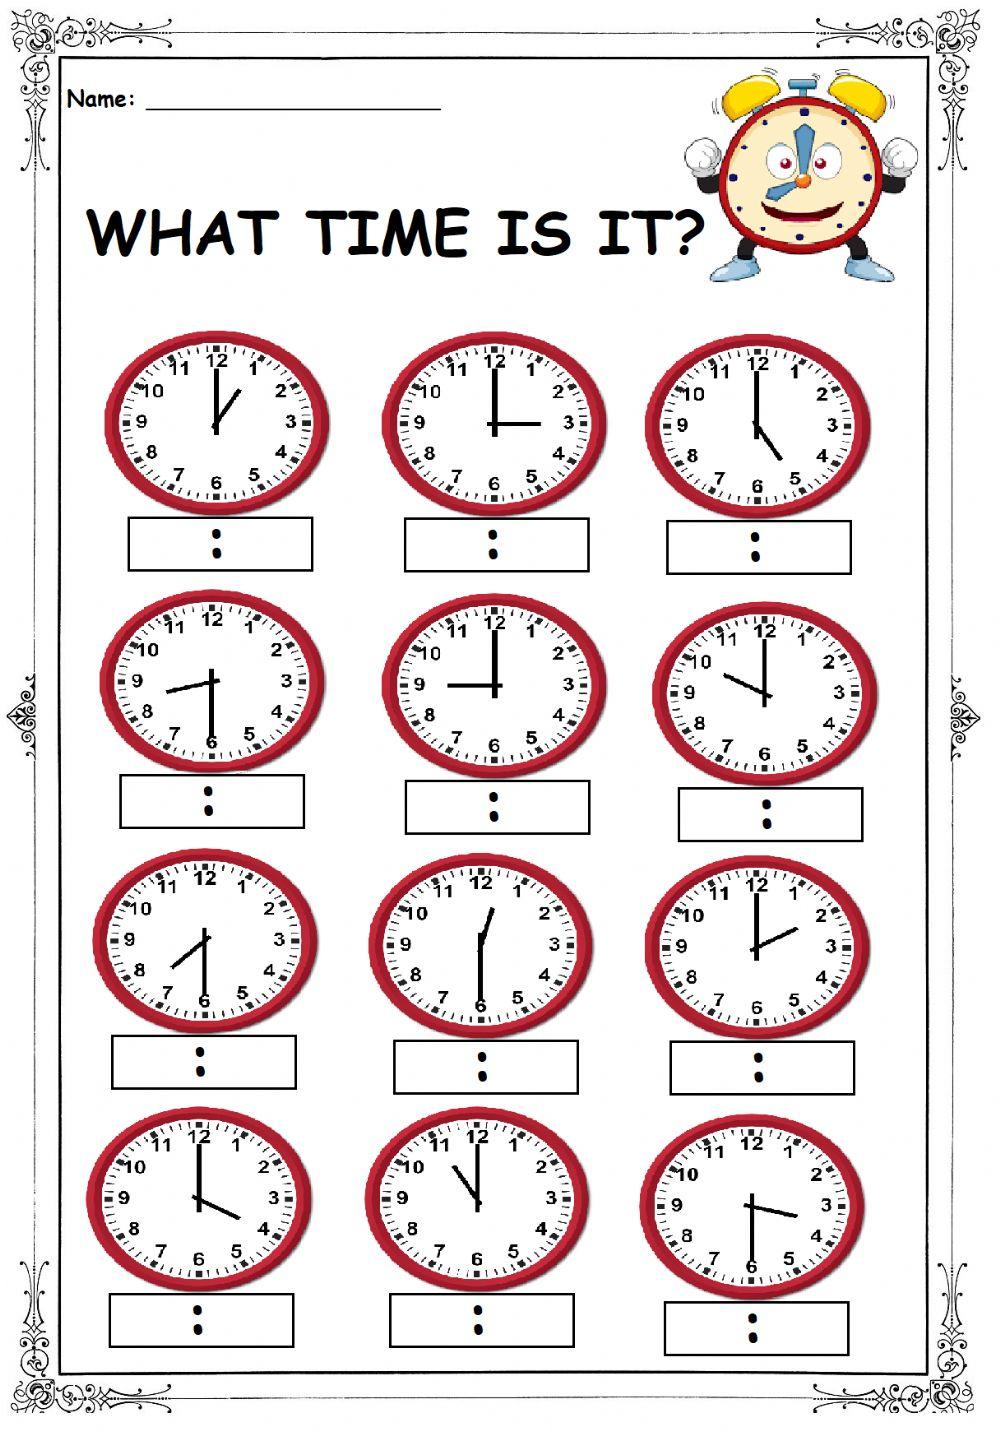 What Time Is It?